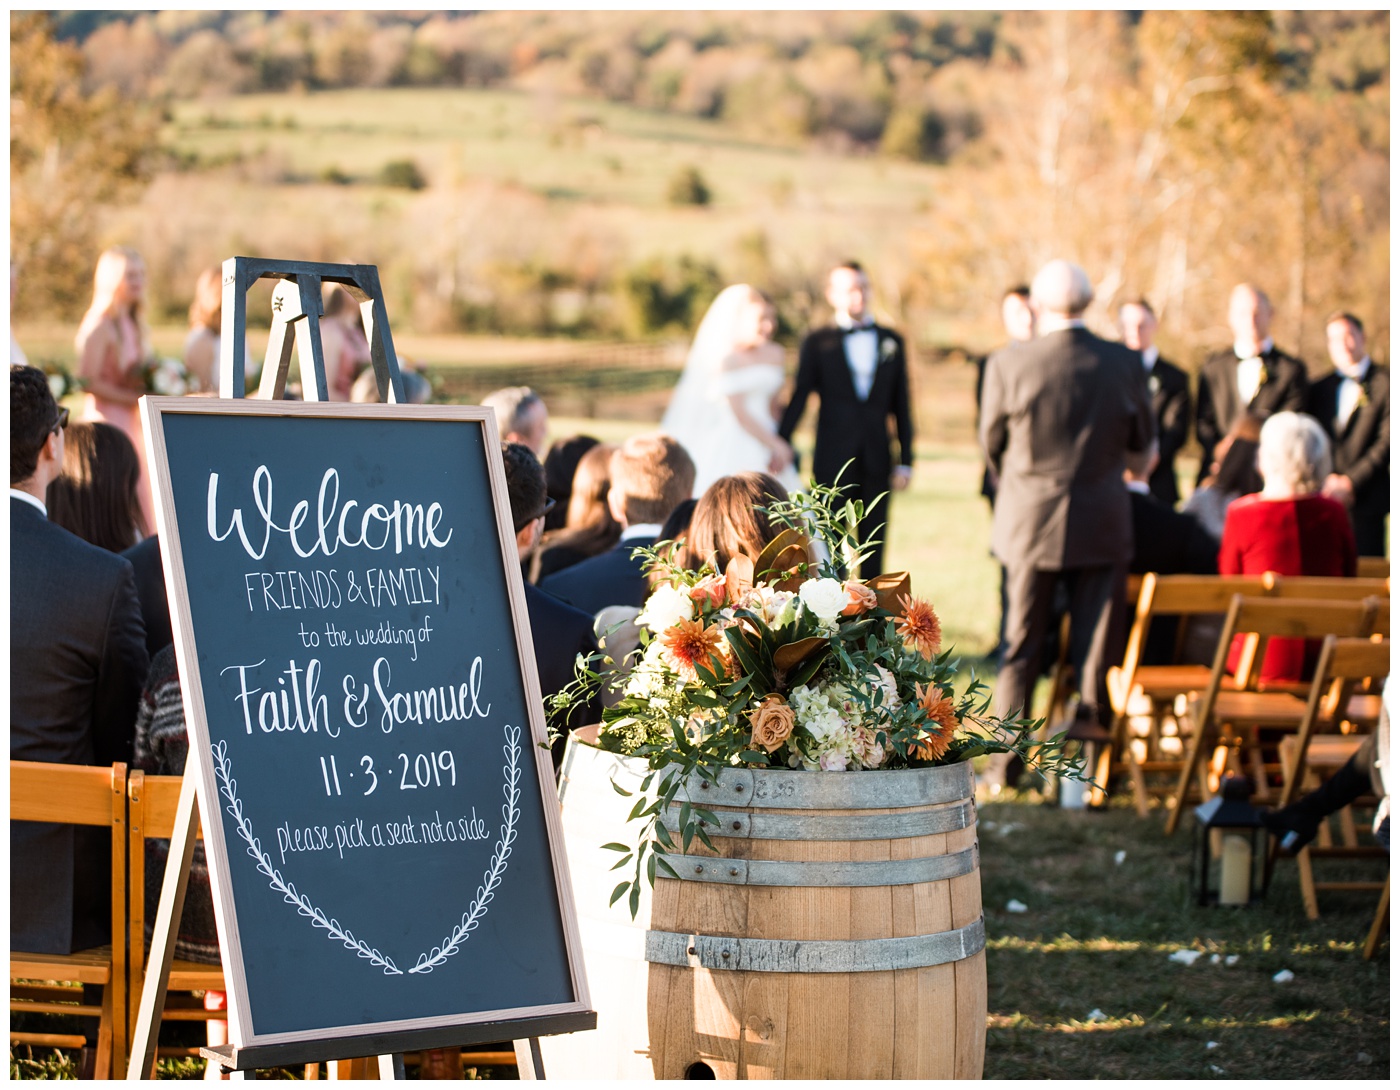 Wedding Ceremony with colorful Fall leaves and Virginia mountain backdrop